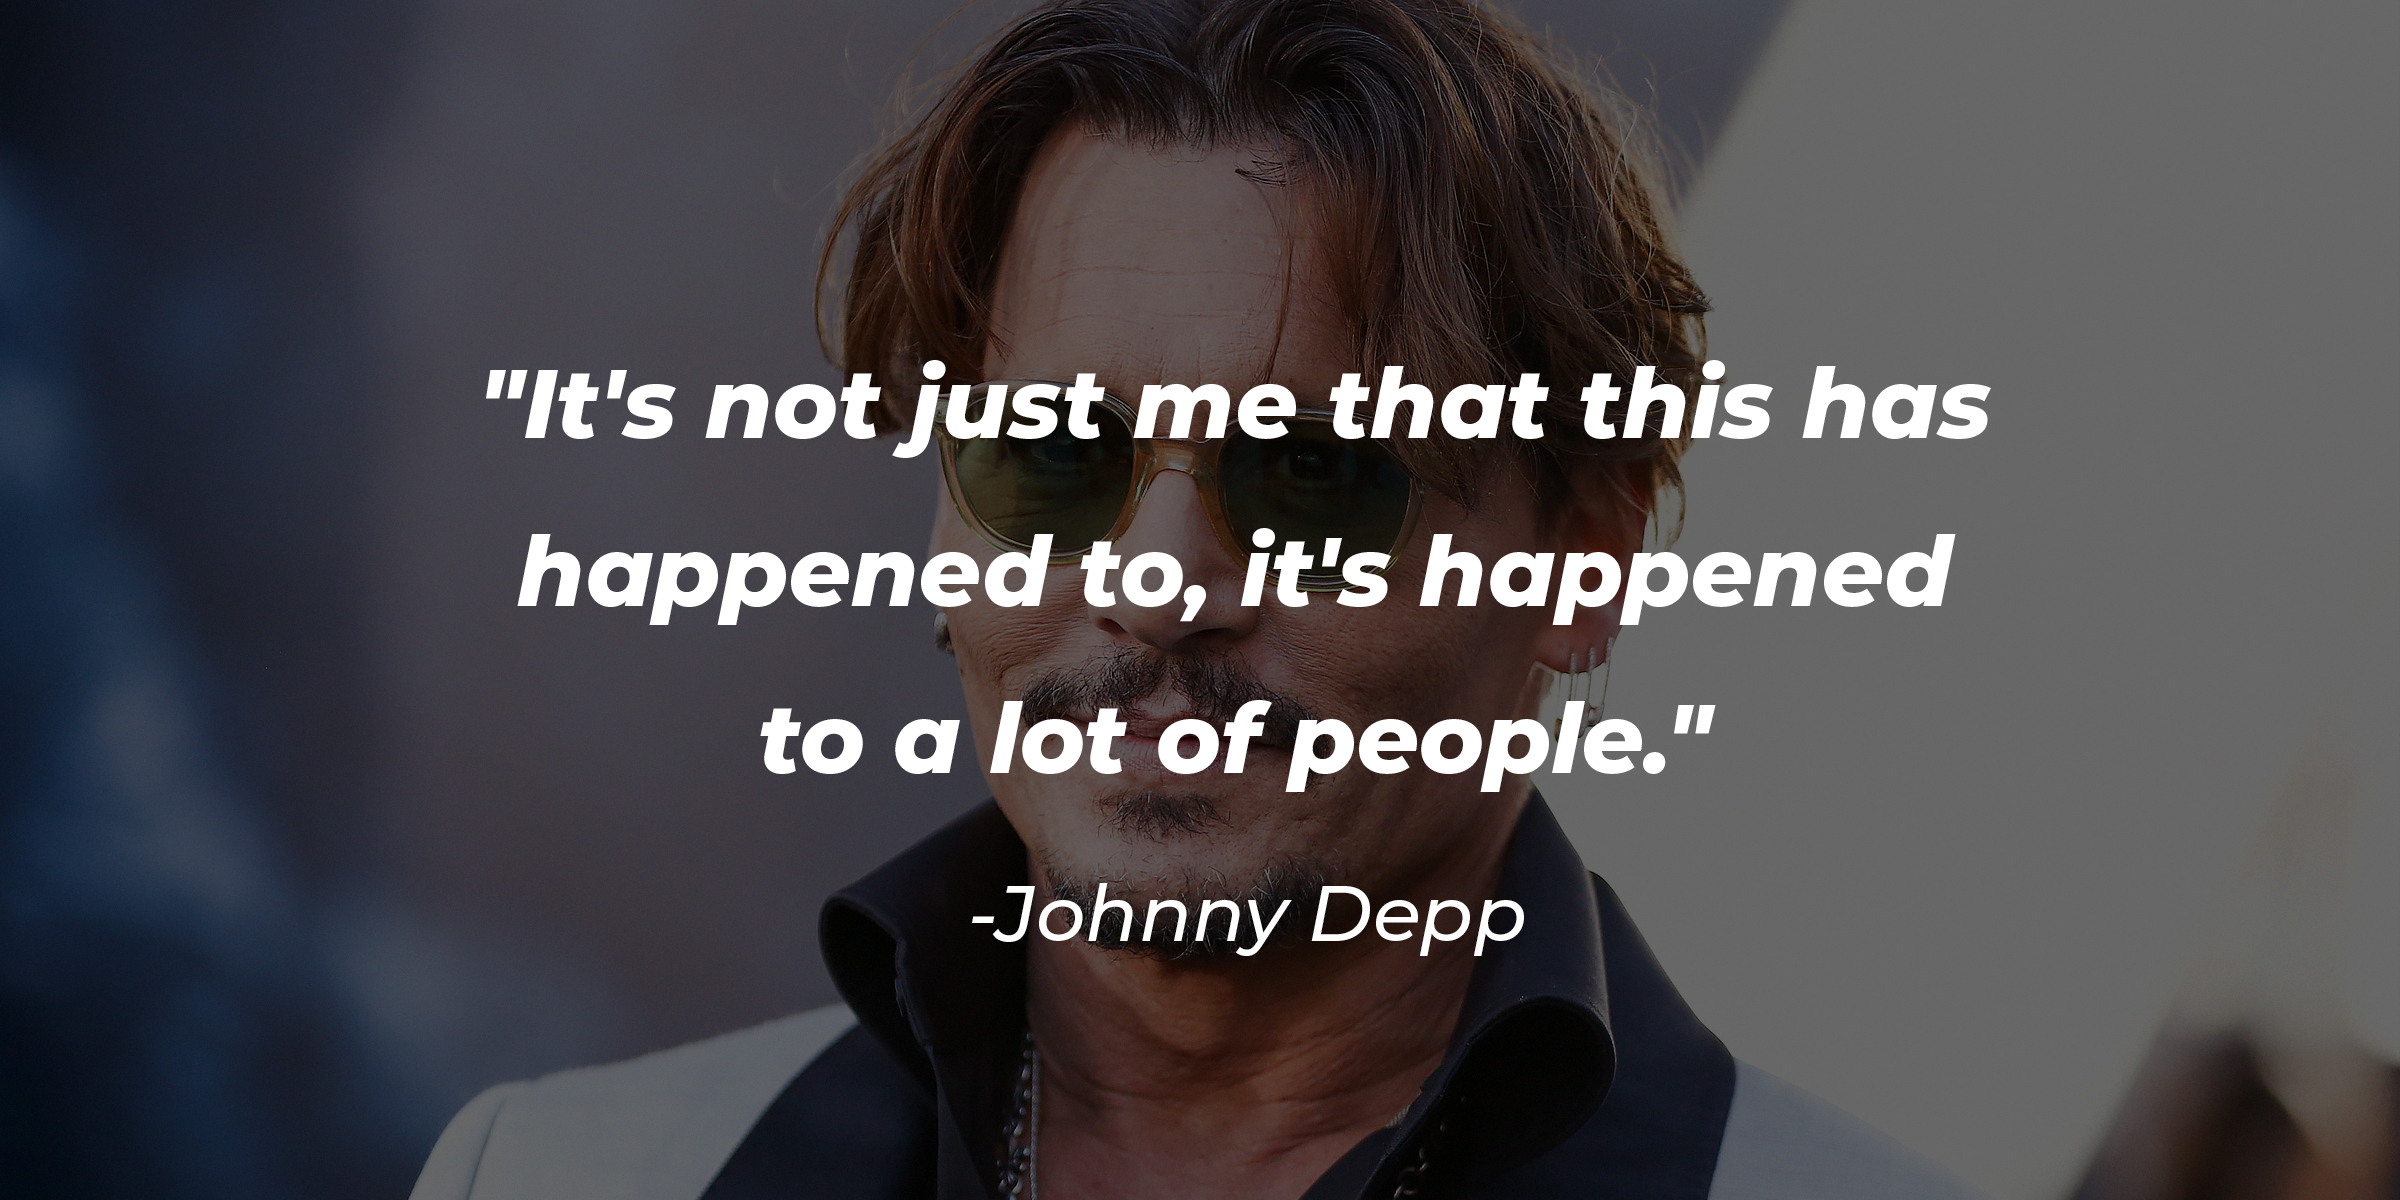 Photo of Johnny Depp with the quote: "It's not just me that this has happened to, it's happened to a lot of people." | Source: Getty Images